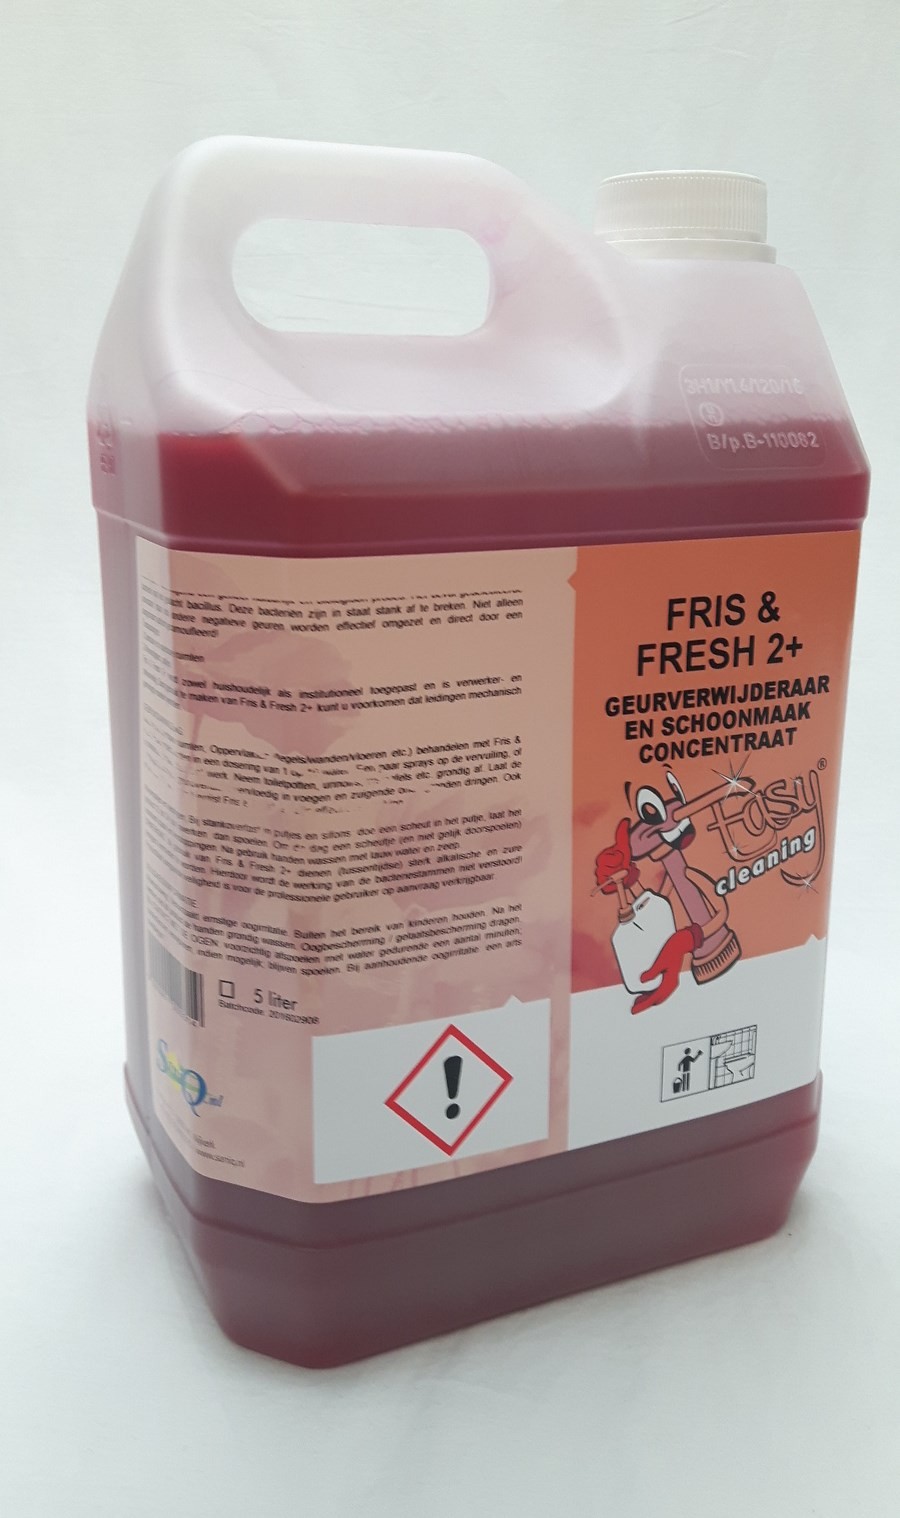 Easy Cleaning Nr. 2+ Fris & fresh 5 liter concentraat 